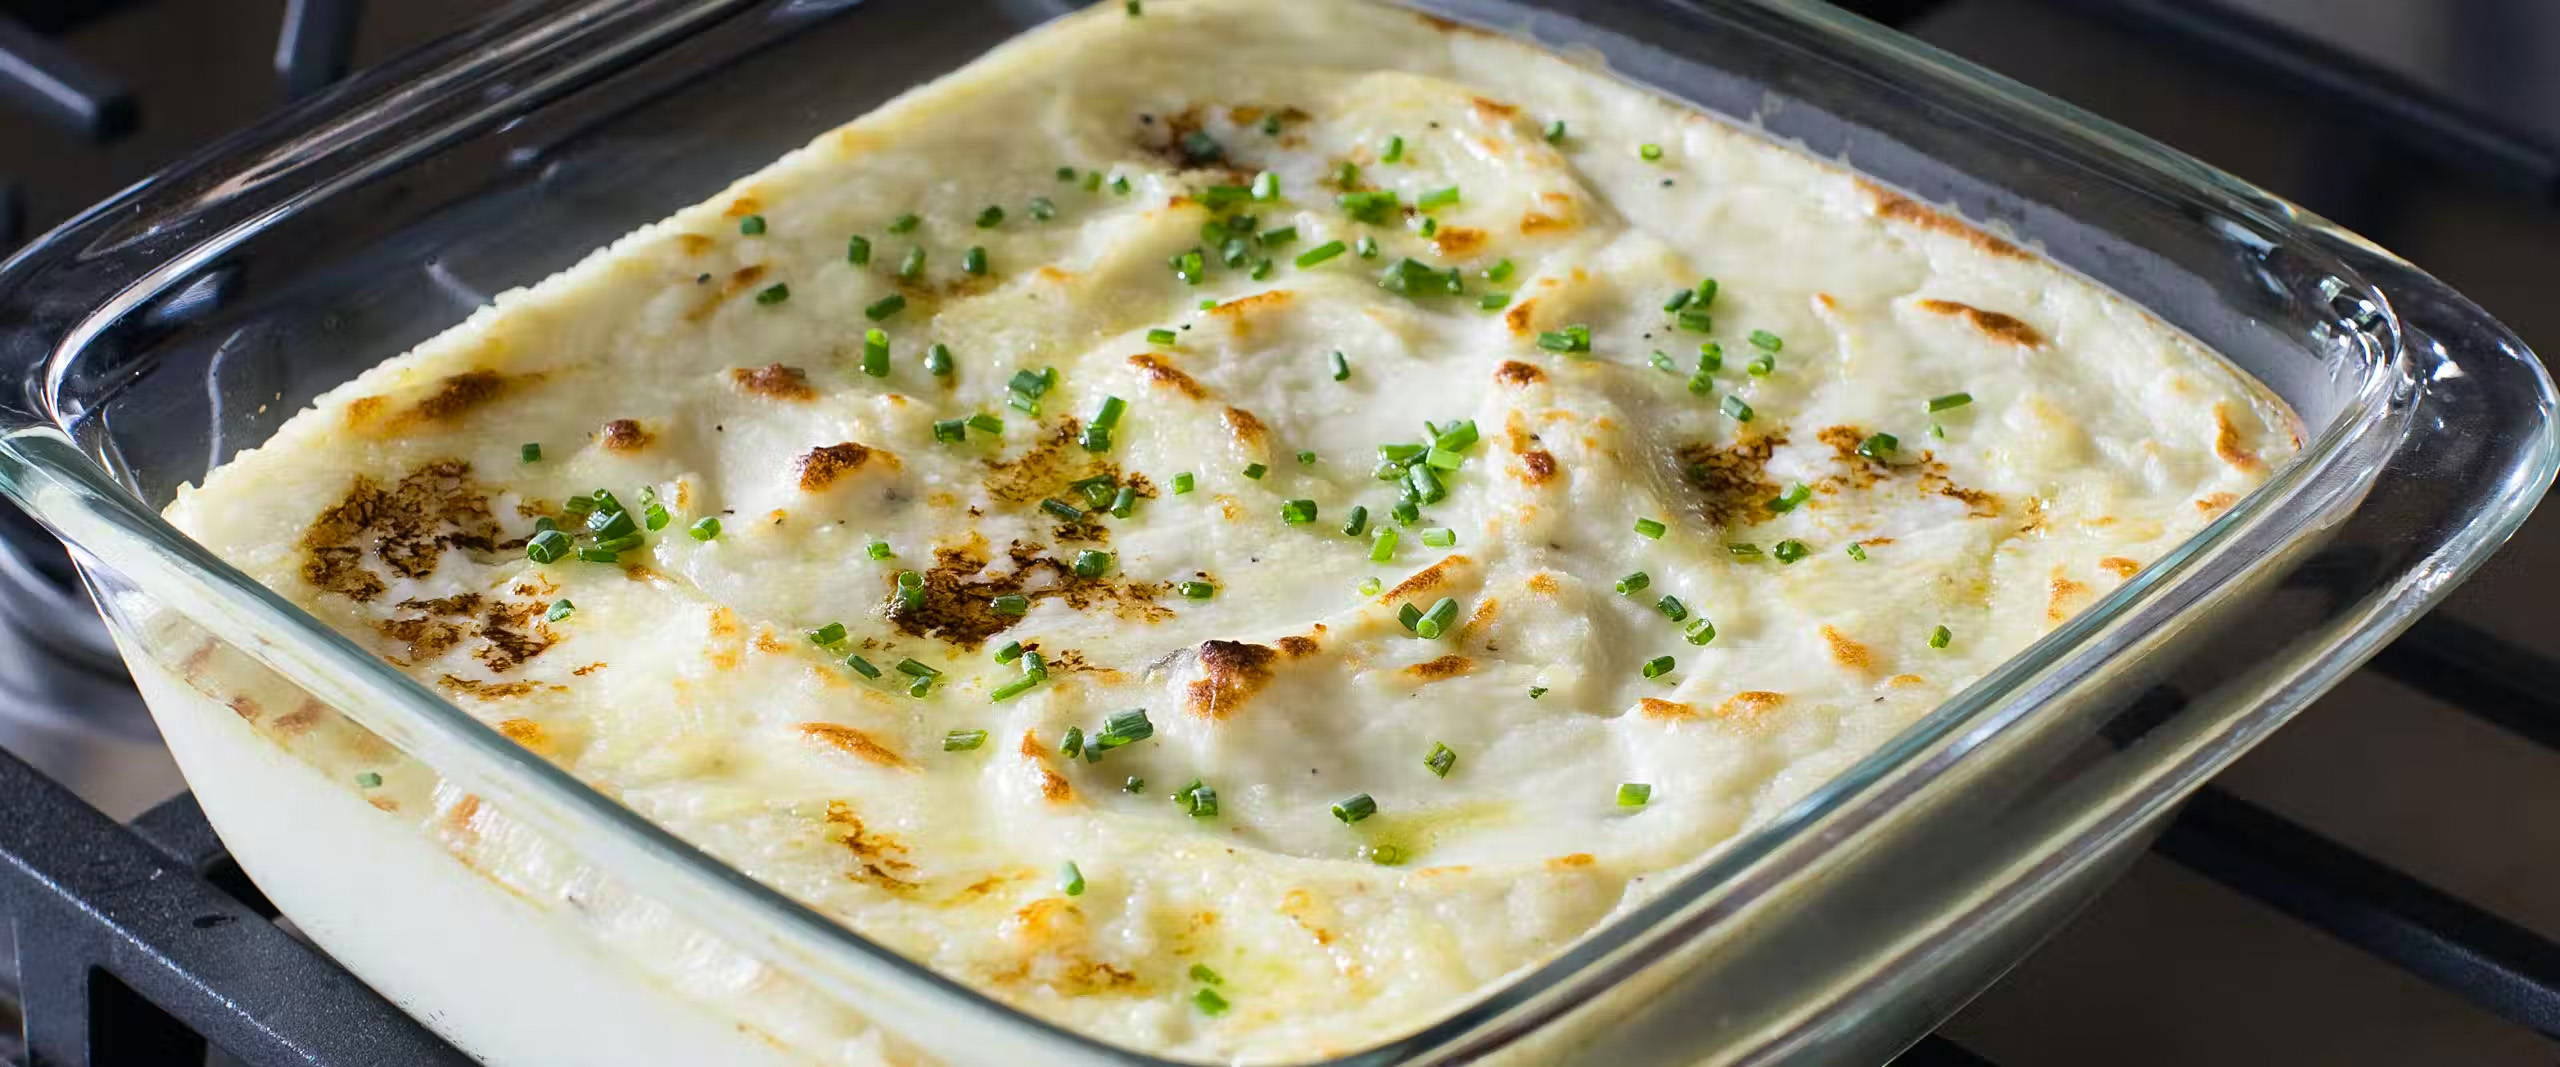 Make Ahead Mashed Potatoes in a glass baking dish